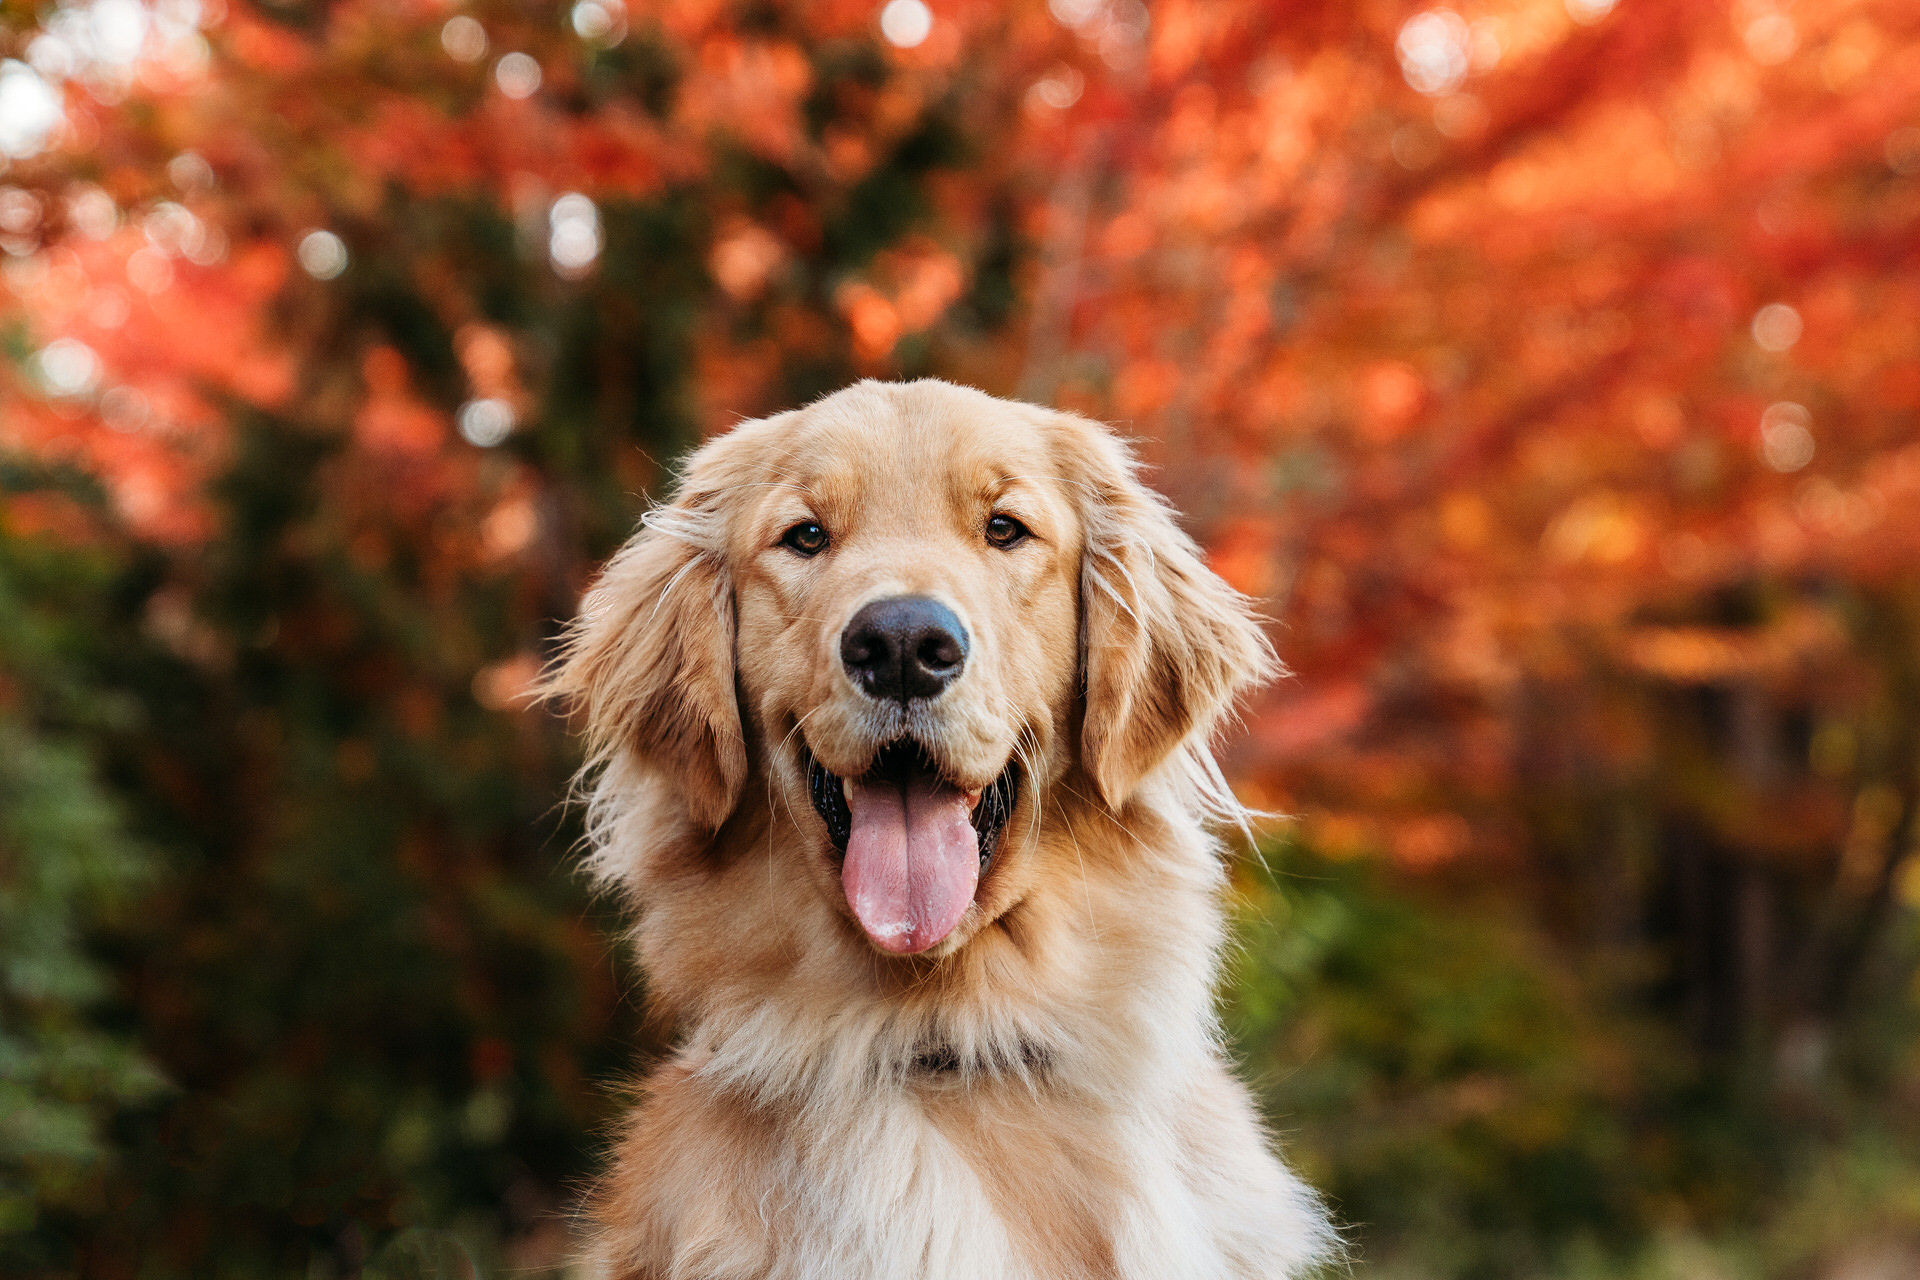 dog smiles with autumn leaves behind him